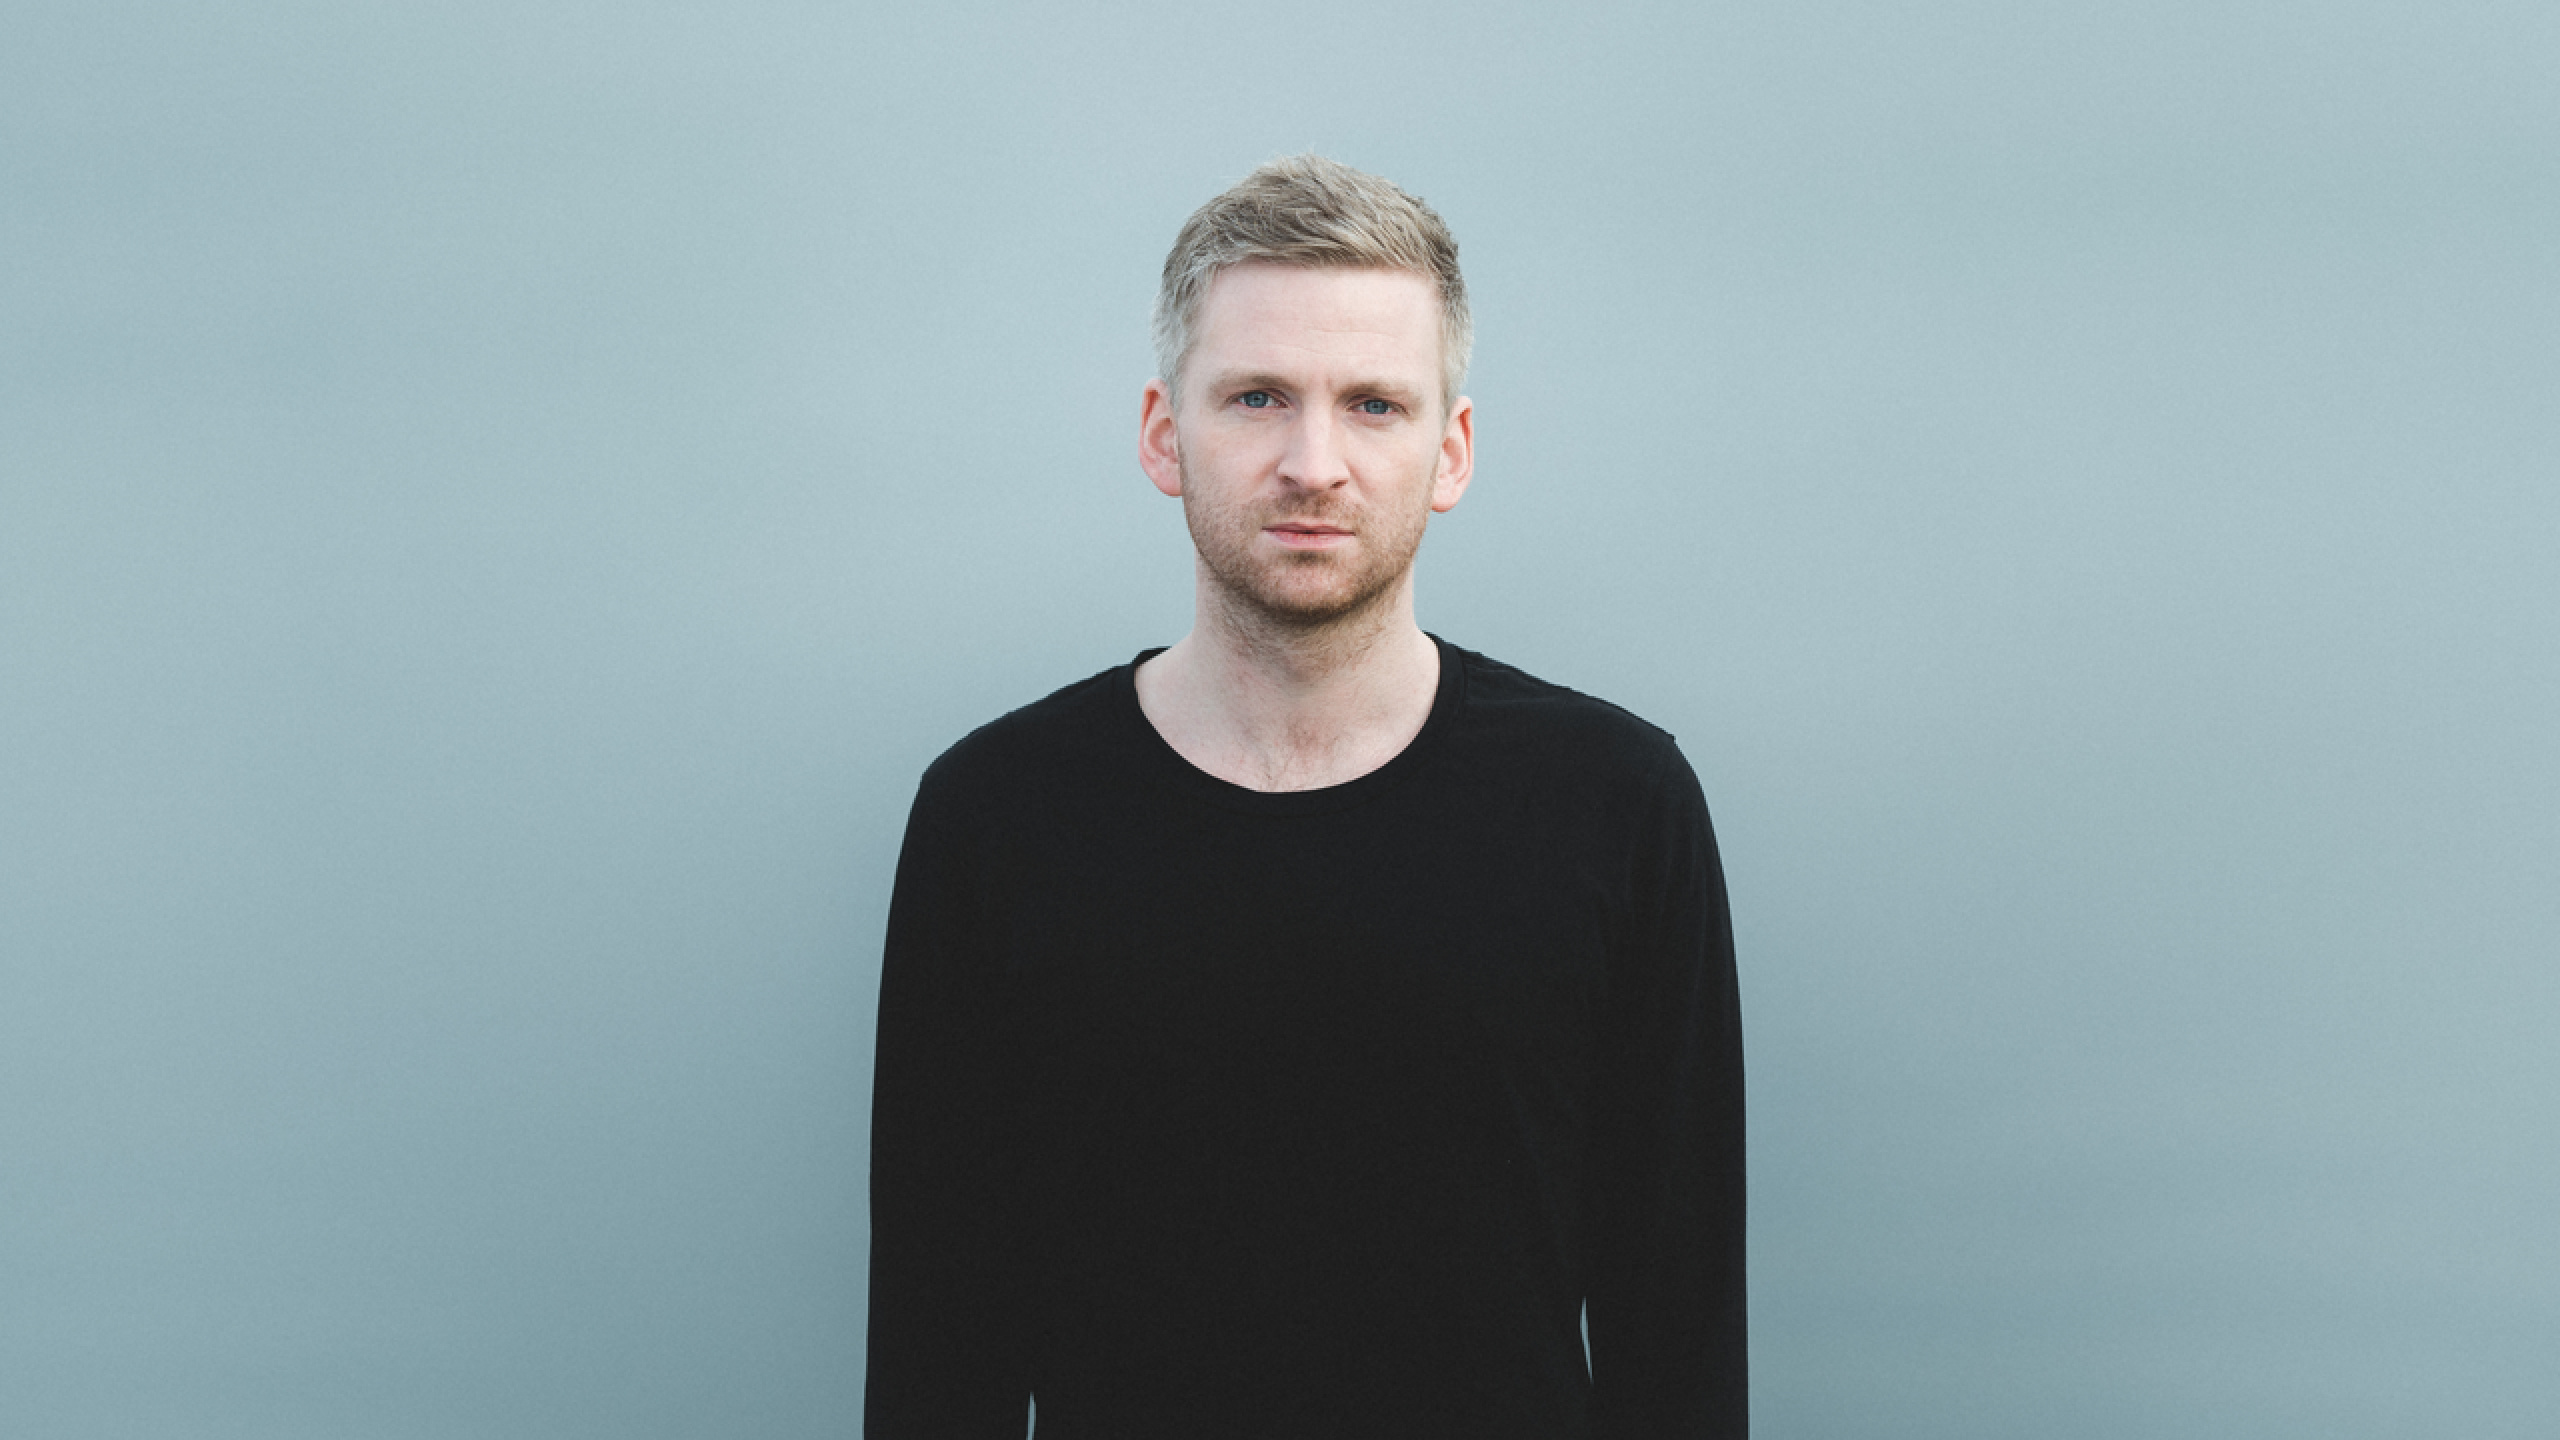 Olafur Arnalds (Music), Atmospheric compositions, Ethereal melodies, Concert tour info, 2560x1440 HD Desktop